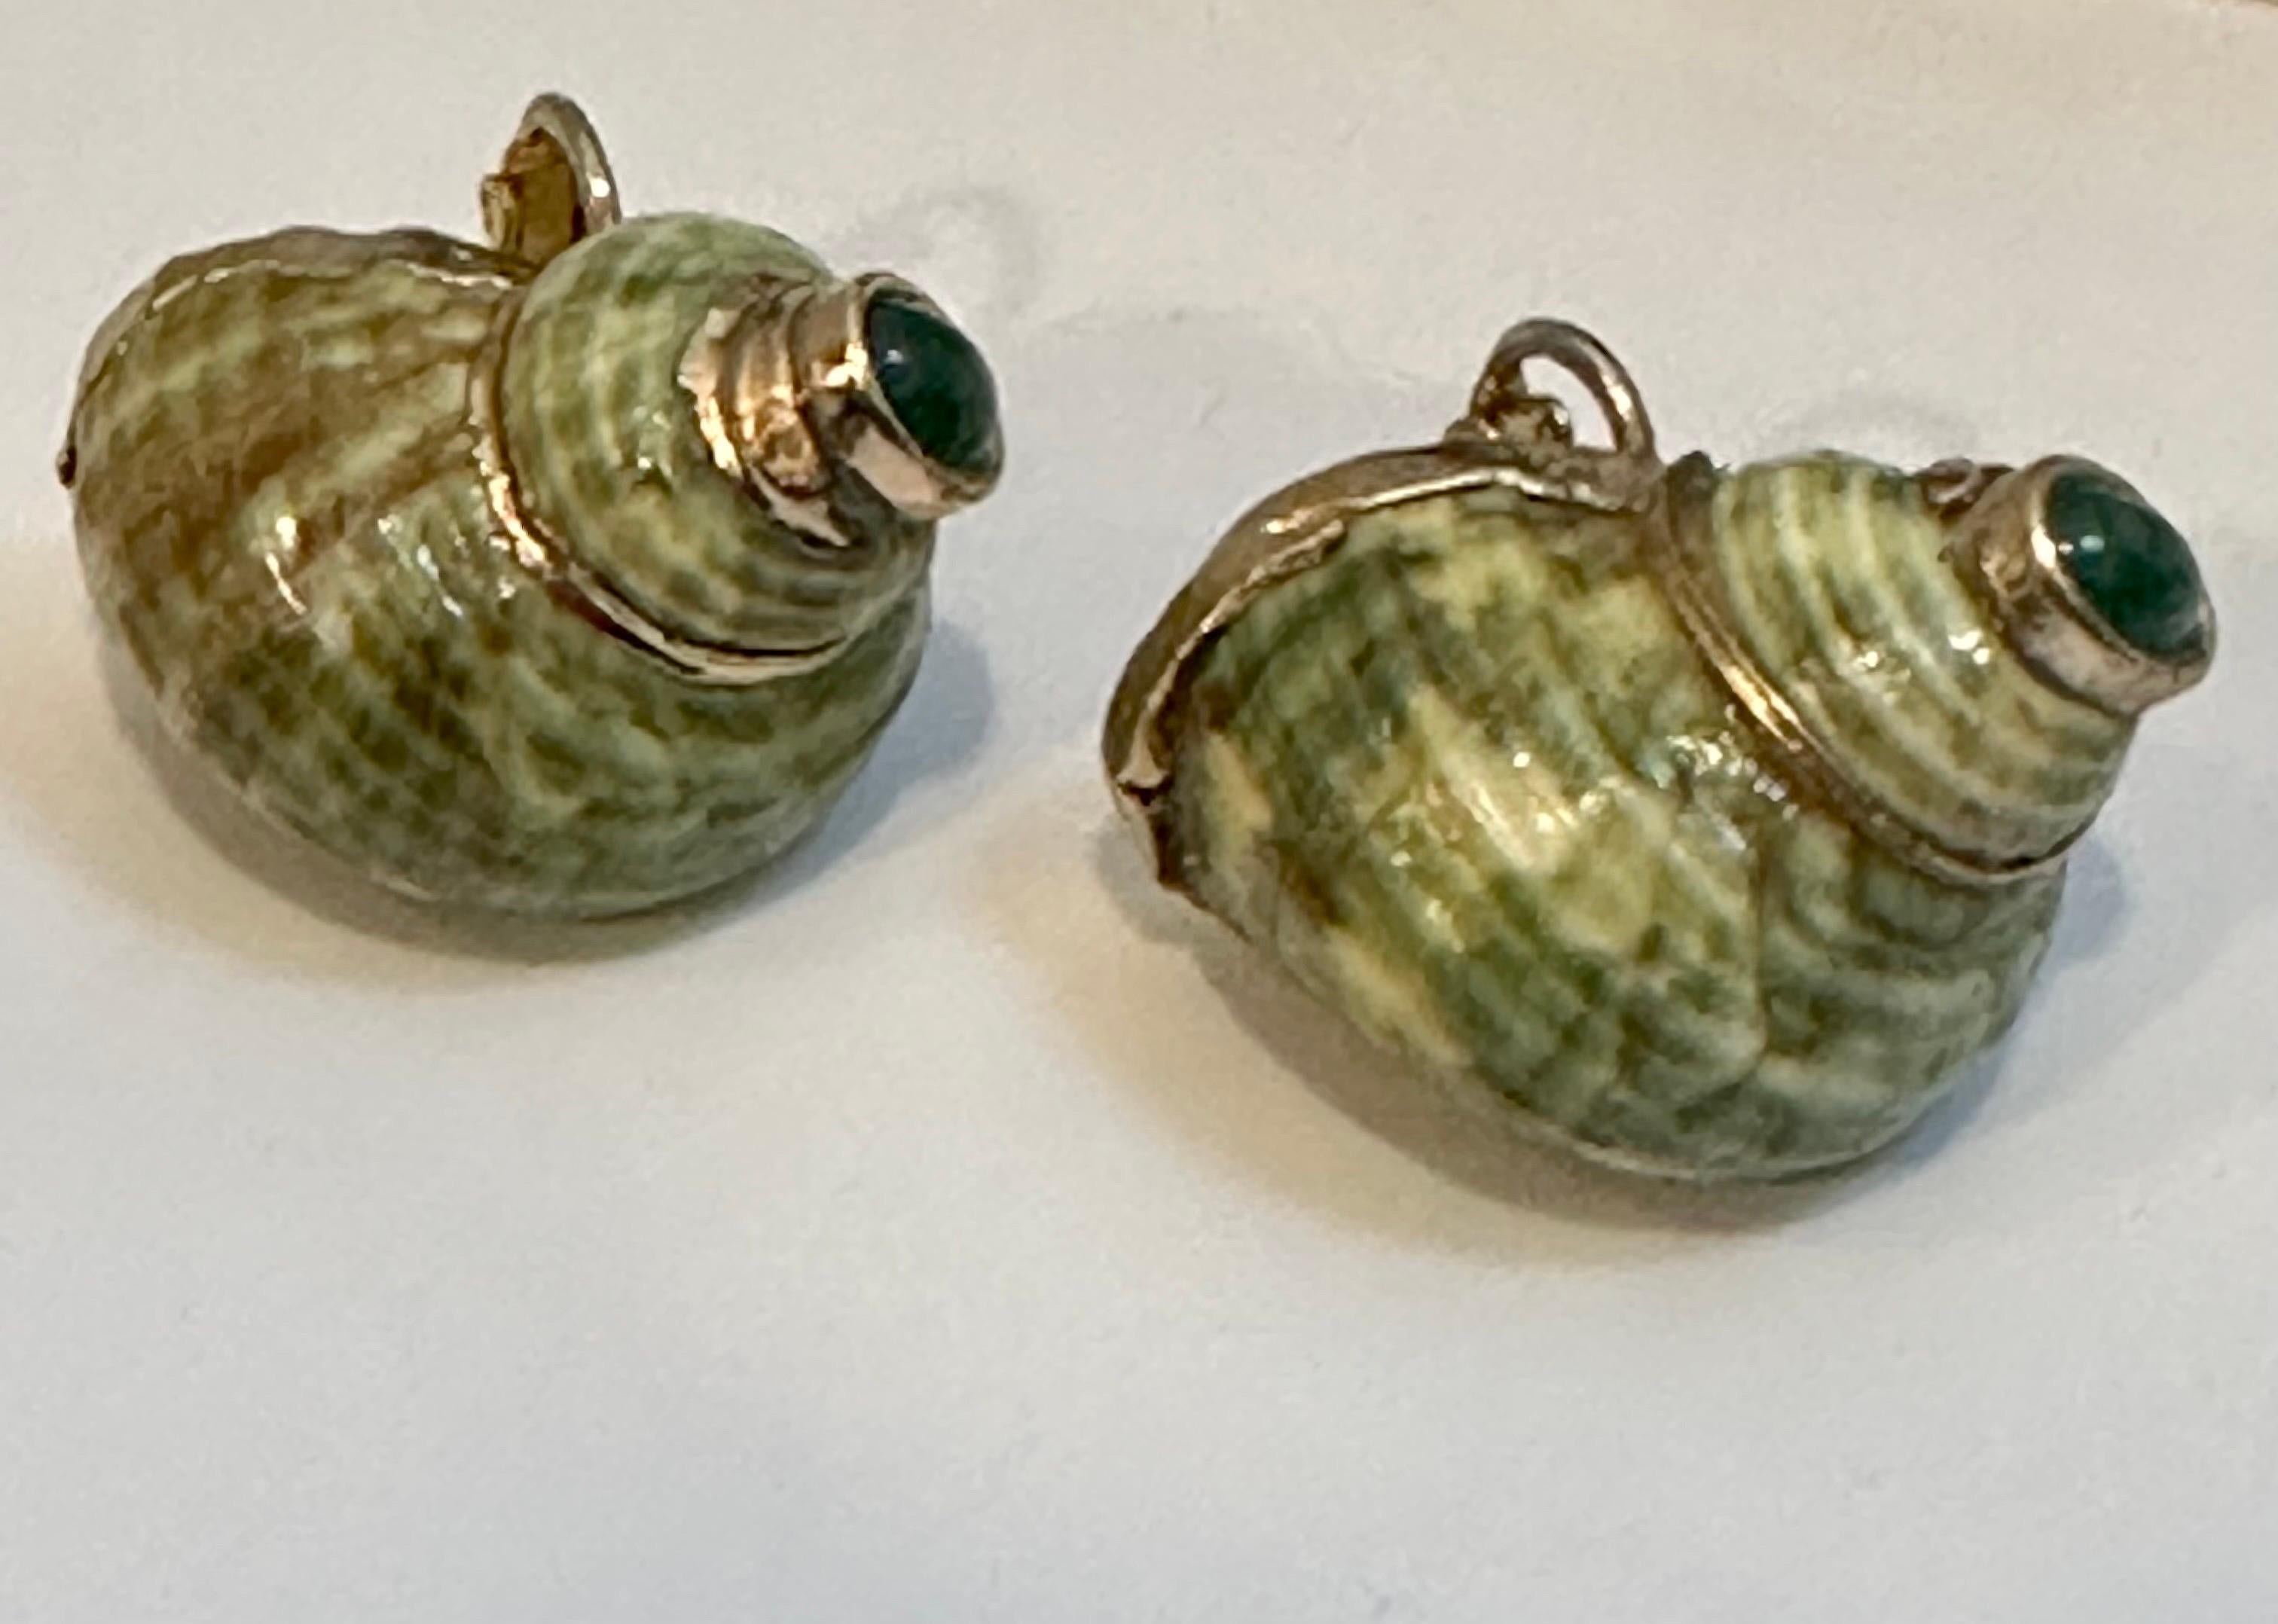 Vintage  Turbo Shell Emerald  Cabochon Gold Earring Mother of Pearl clip on earring
This exquisite pair of earrings are beautifully crafted in shell and gold  they are clip earrings. Post can be added .
Clip on earrings
Weight of the earring 14.5